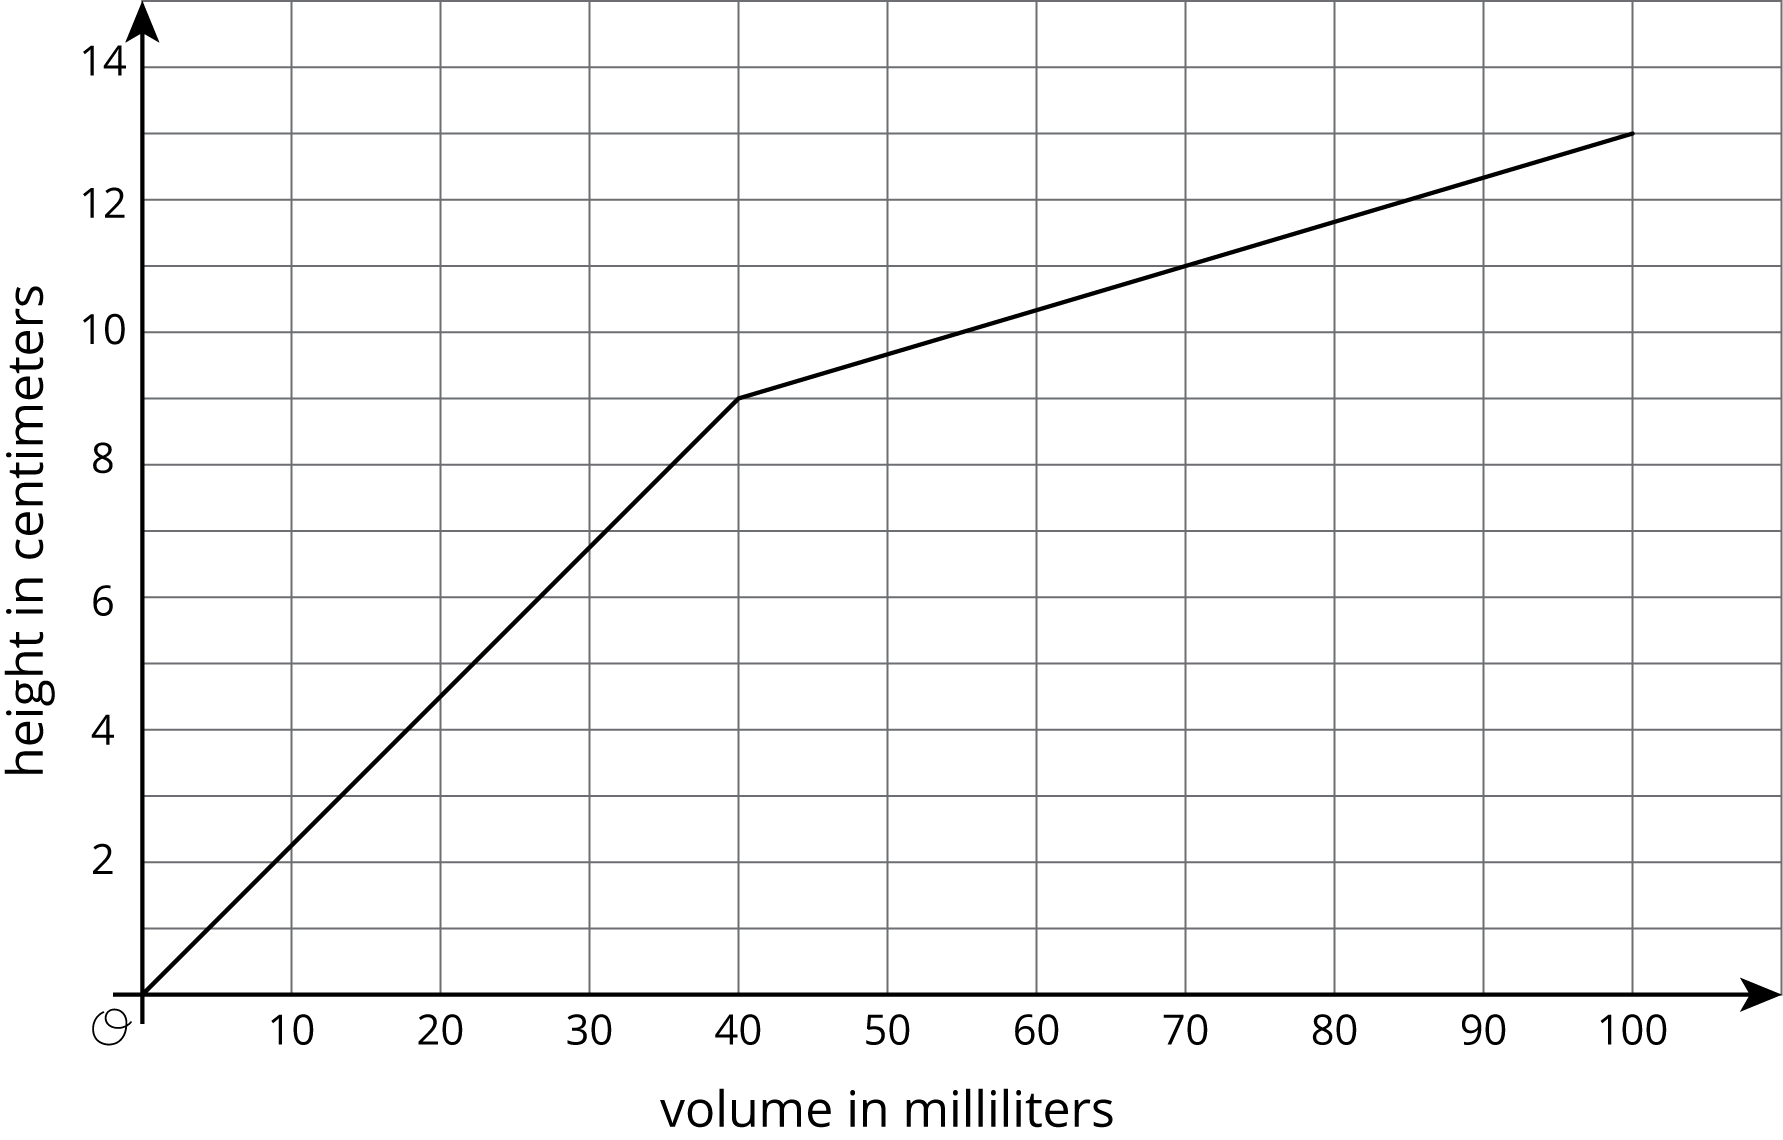 The graph of two connected line segments on the coordinate plane with the origin labeled “O”. The horizontal axis is labeled “volume in millilters” and the numbers 0 through 100, in increments of 10, are indicated. The vertical axis is labeled “height in centimeters” and the numbers 0 through 14, in increments of 2, are indicated. The first line begins at the origin, moves steadily upward and to the right, ending at the point 40 comma 9. The second line segment begins where the first line segment ends, moves steadily upward and to the right passing through the point 70 comma 11 and ending at the point 100 comma 13.